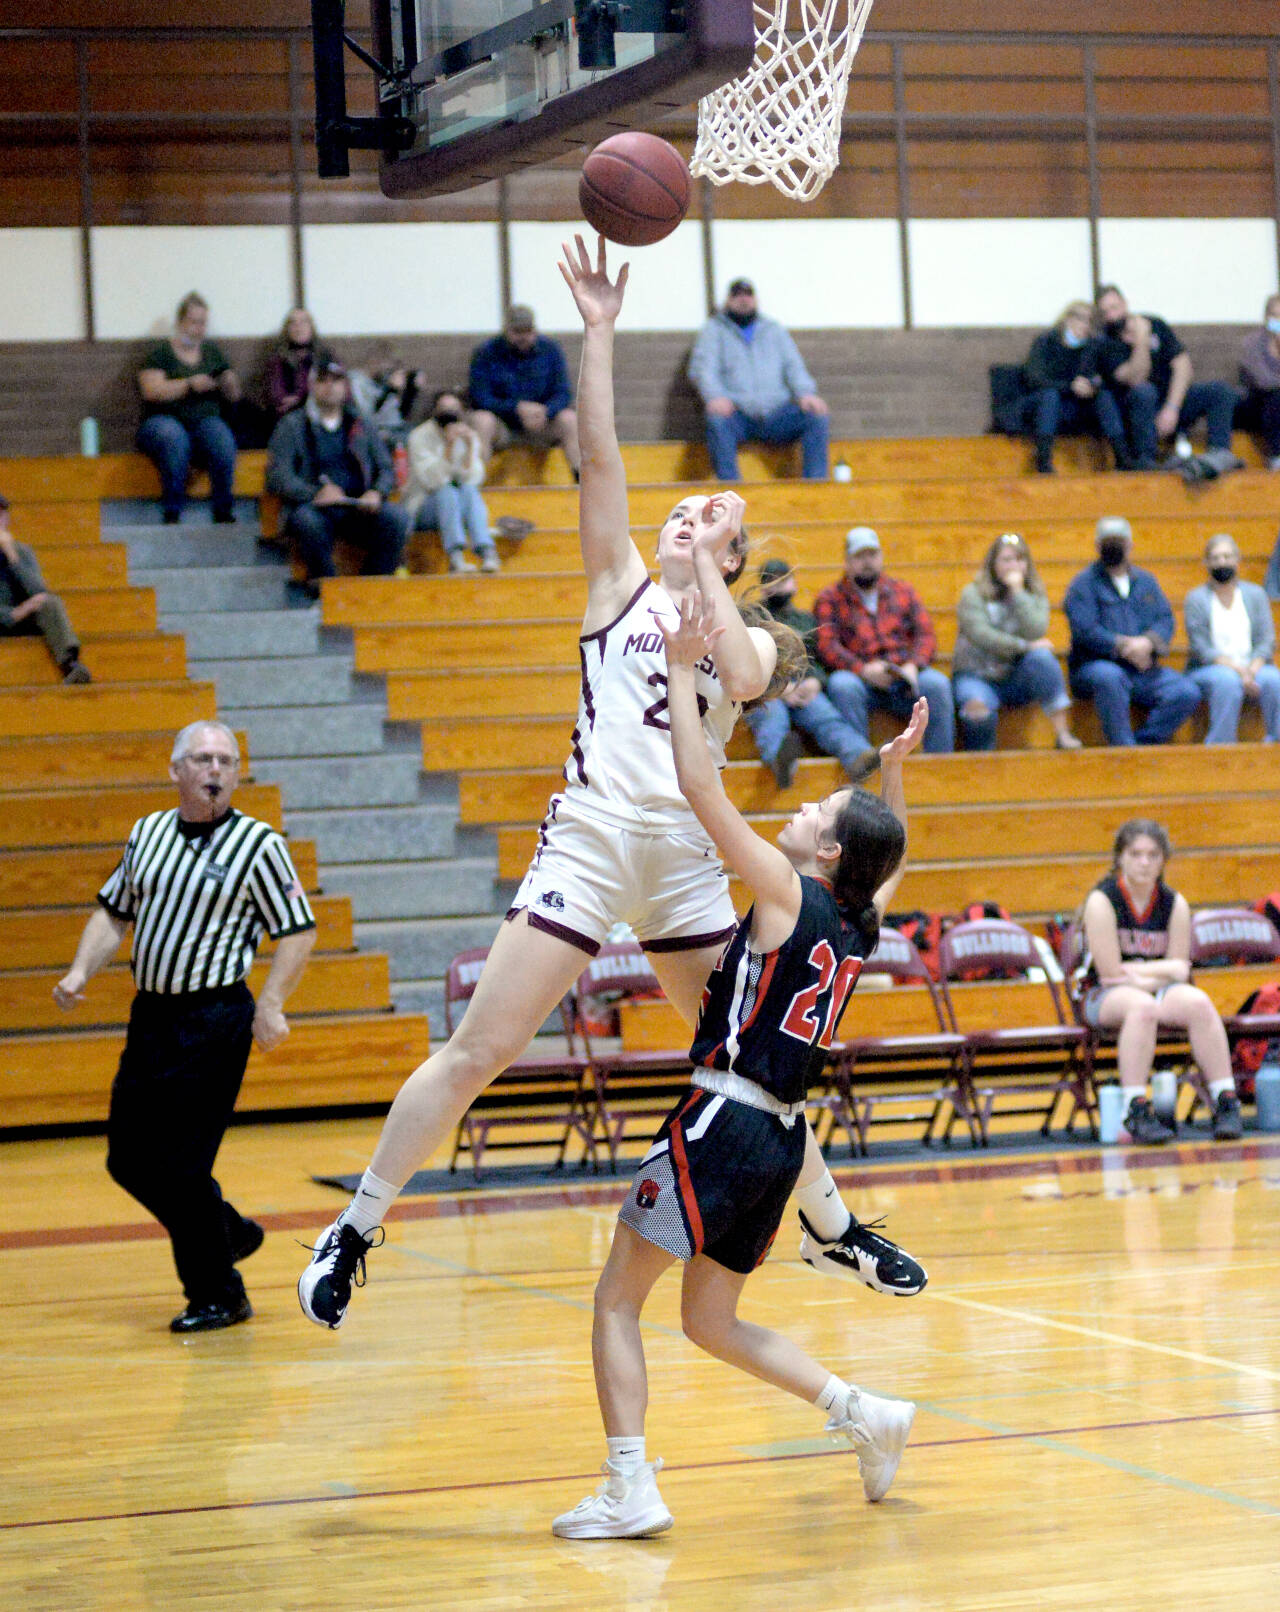 RYAN SPARKS | THE DAILY WORLD Montesano senior Paige Lisherness (23) glides to the basket against Columbia-White Salmon’s Chloe Clifford to score two of her game high 32 points in the Bulldogs’ 79-29 victory on Friday in Montesano.